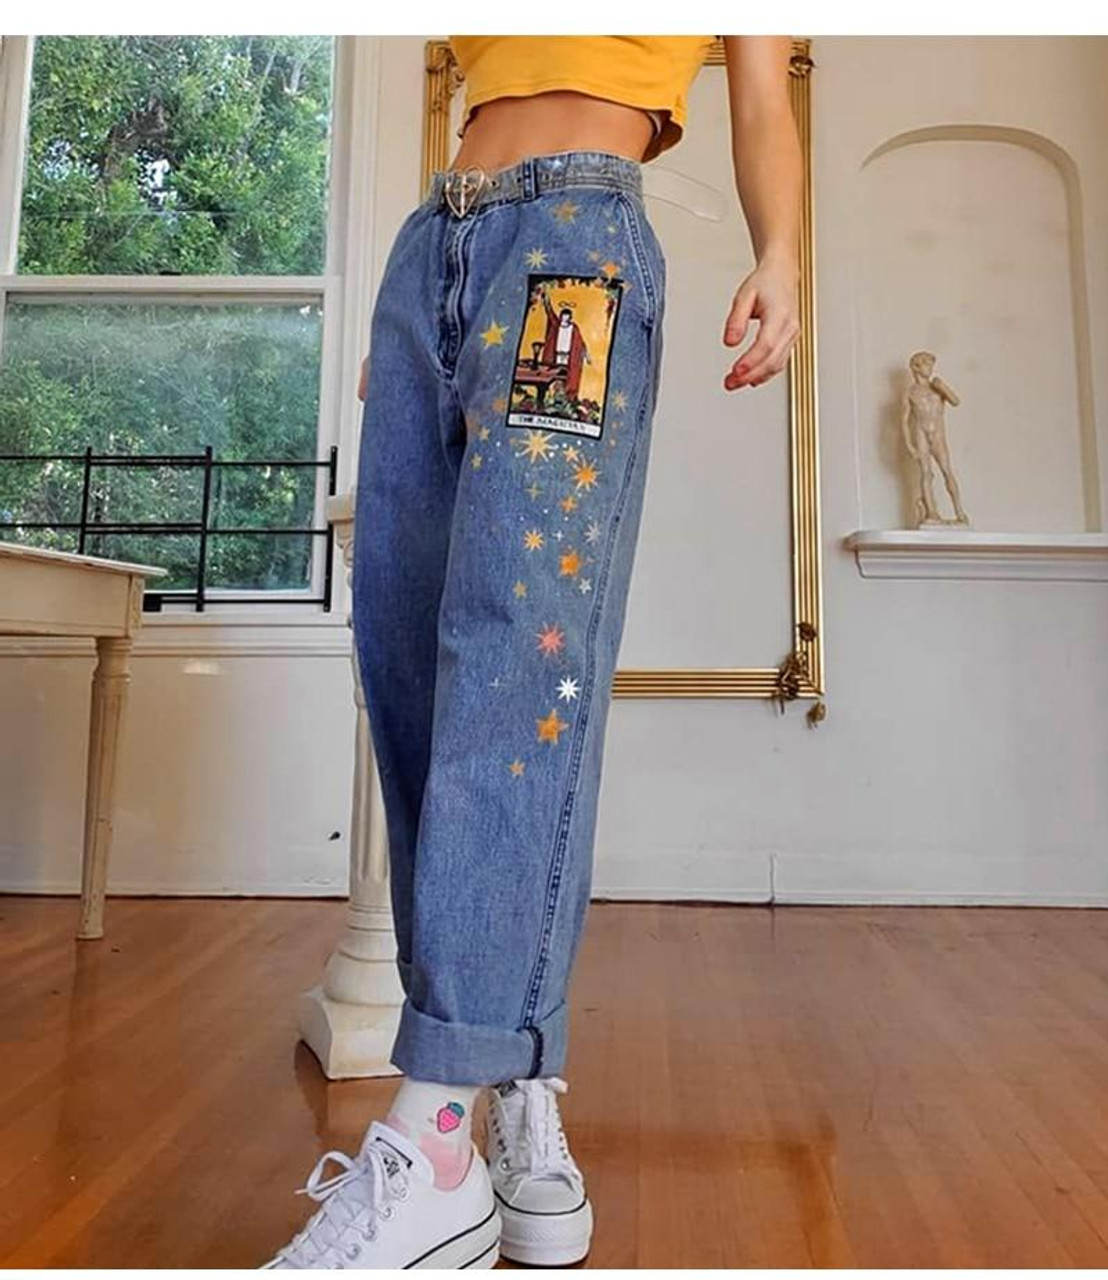 Darlingaga Streetwear Butterfly Print Denim Pants Women Straight Loose Trousers  Jeans Blue Fashion High Waist Pants 100% Cotton - Price history & Review |  AliExpress Seller - darlingaga Official Store | Alitools.io